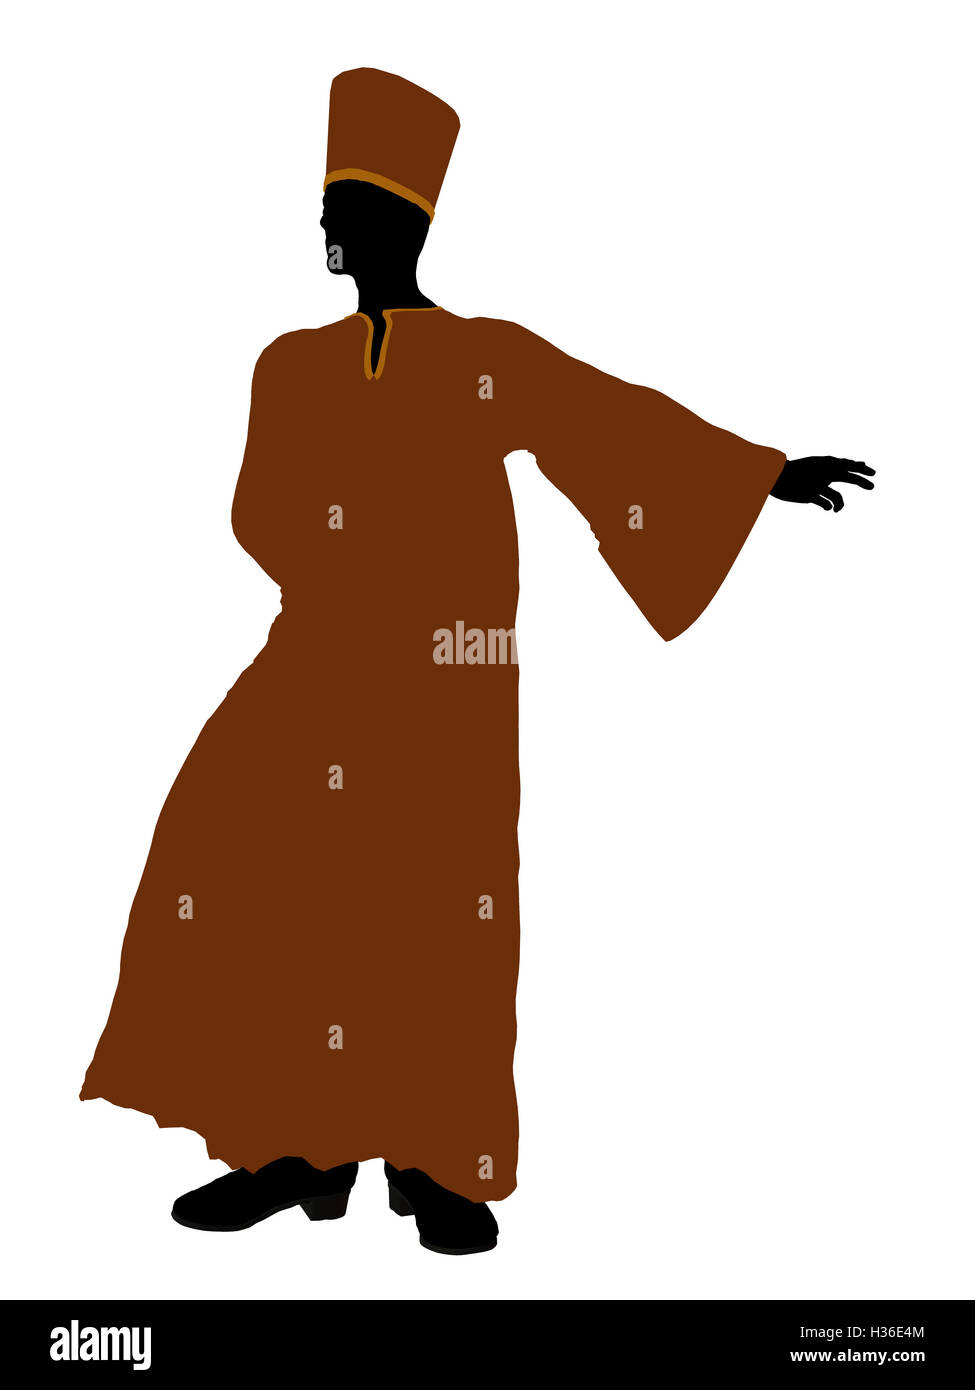 Male Robed Illustration Silhouette Stock Photo - Alamy